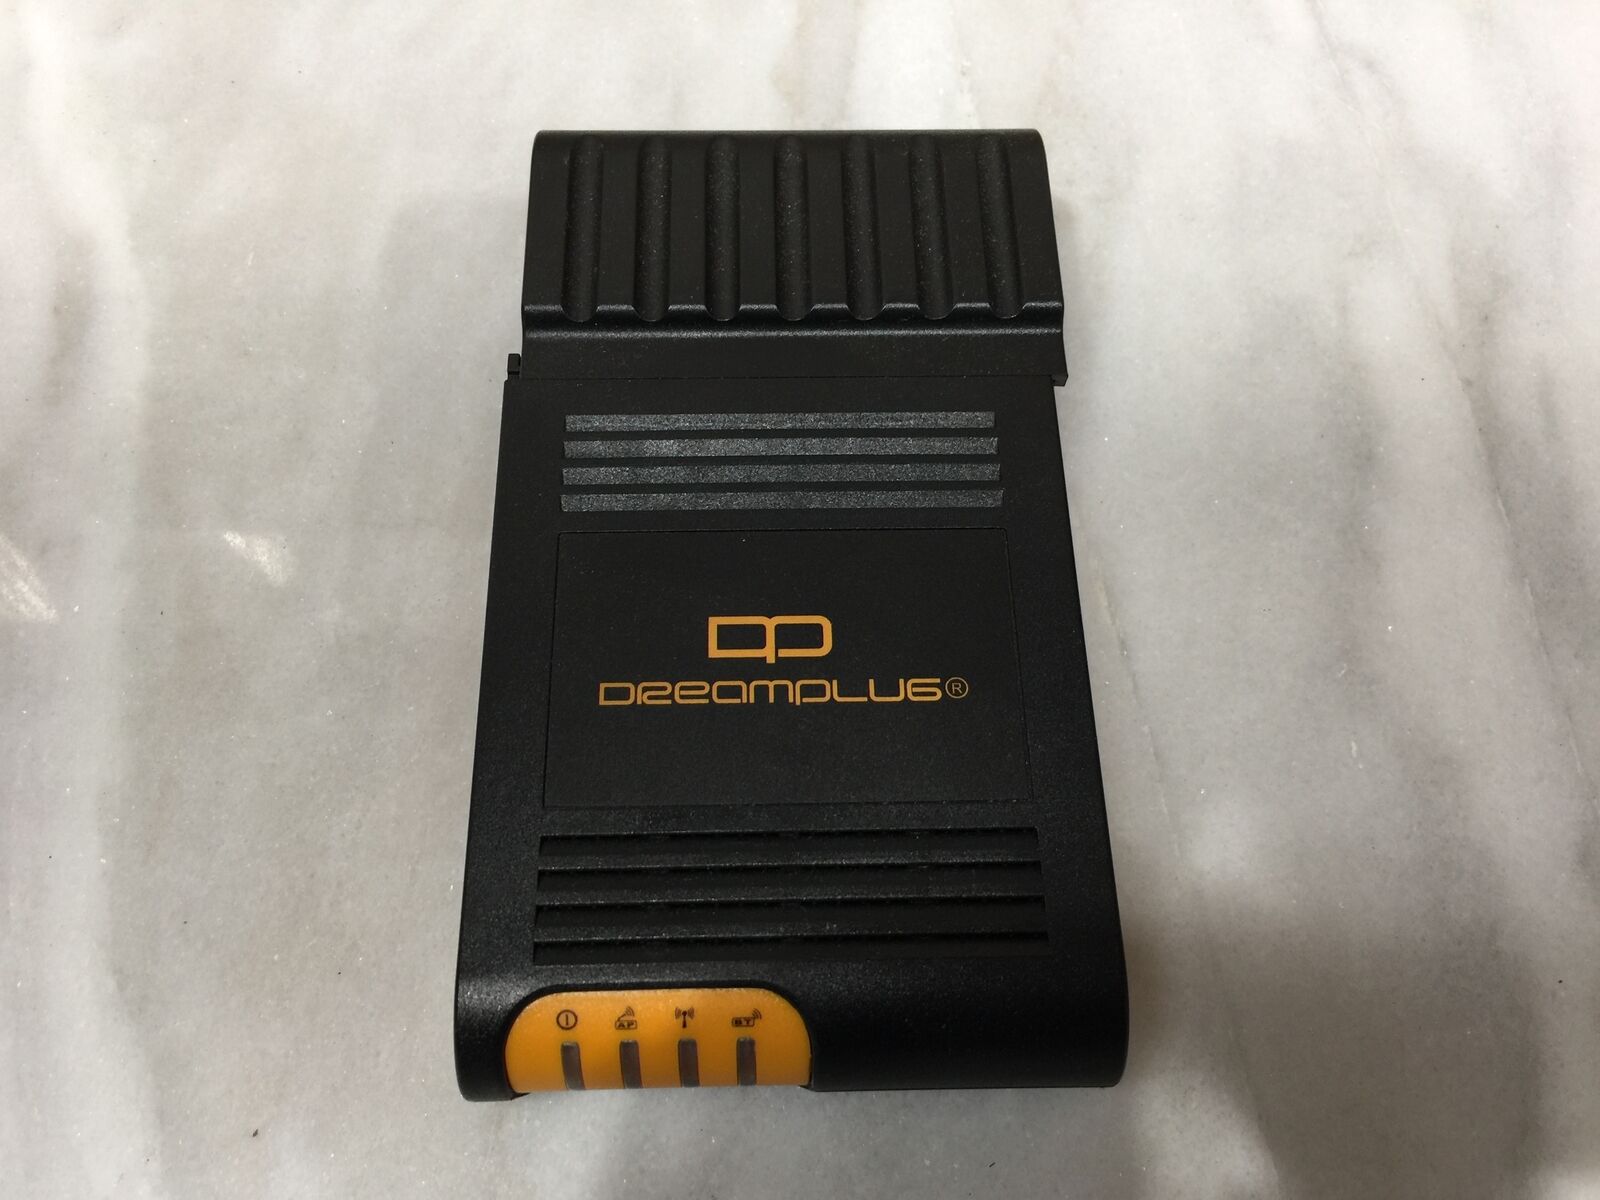 Globalscale Technologies DreamPlug 003-DS2001 Plug Computer - TESTED & RESET